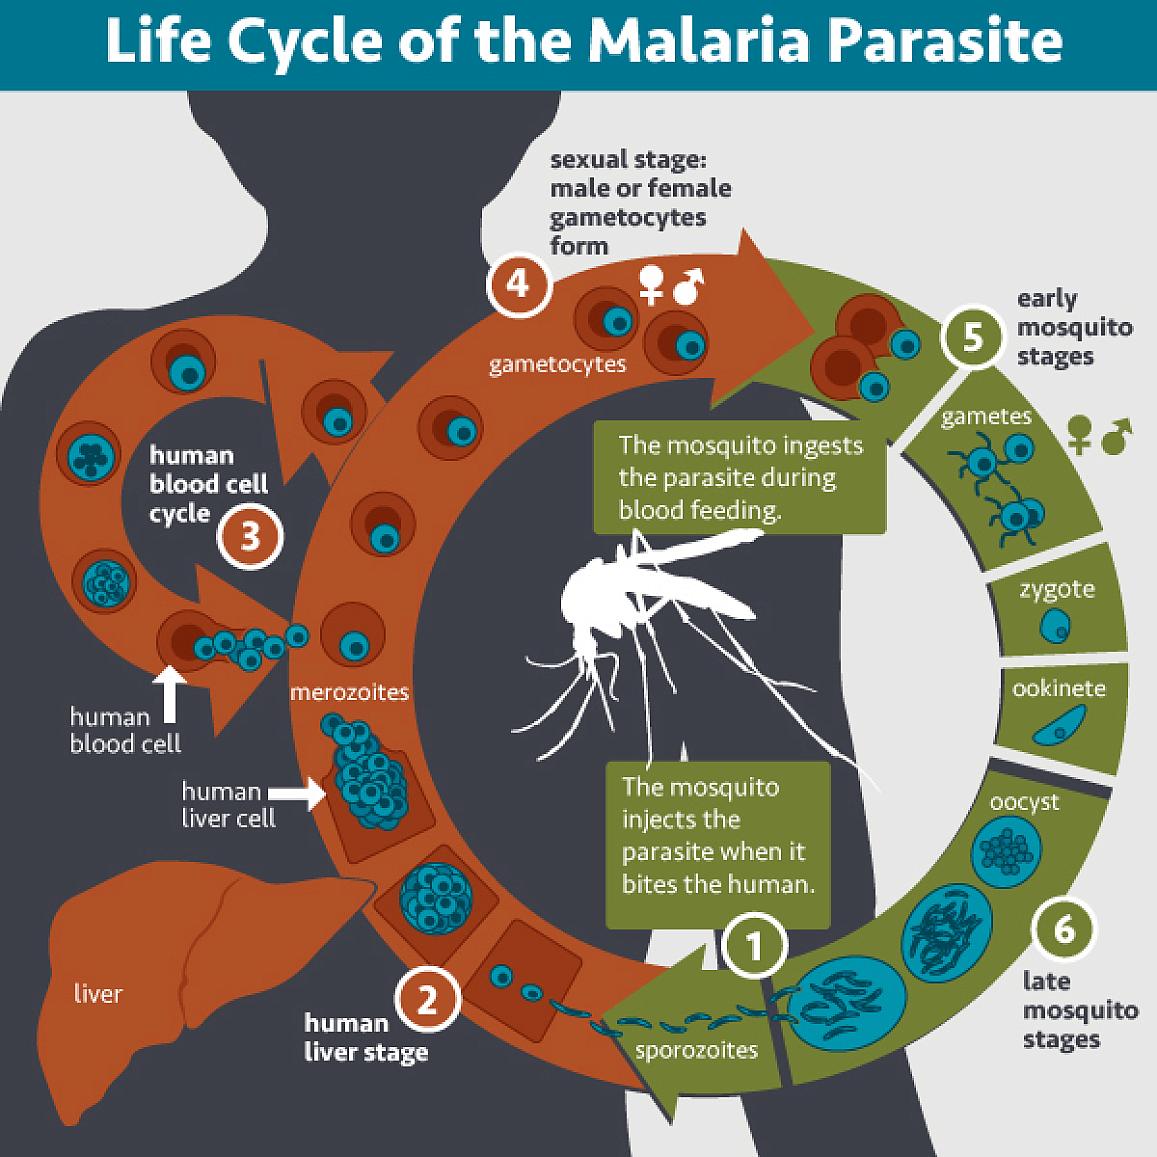 Lifecycle of malaria parasite: Human is infected when a mosquito bite injects parasites into the bloodstream. Parasites invade the liver and later move to the bloodstream. A new mosquito bite lets the parasite infect the insect, restarting the cycle.